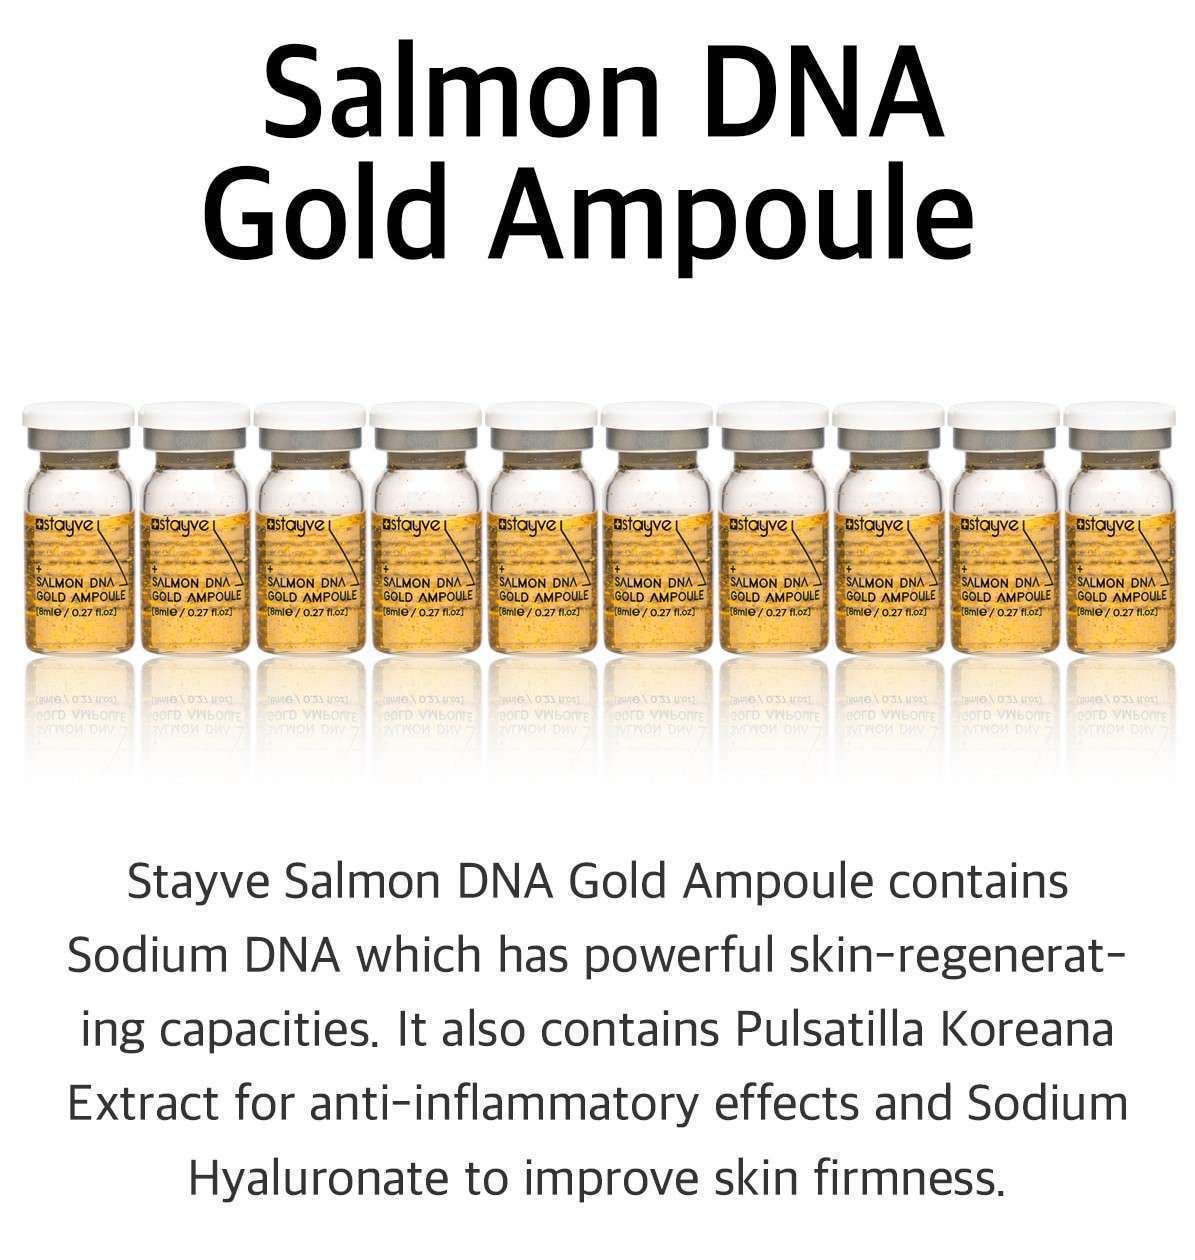 BB Glow Stayve Salmon DNA Gold Ampoule